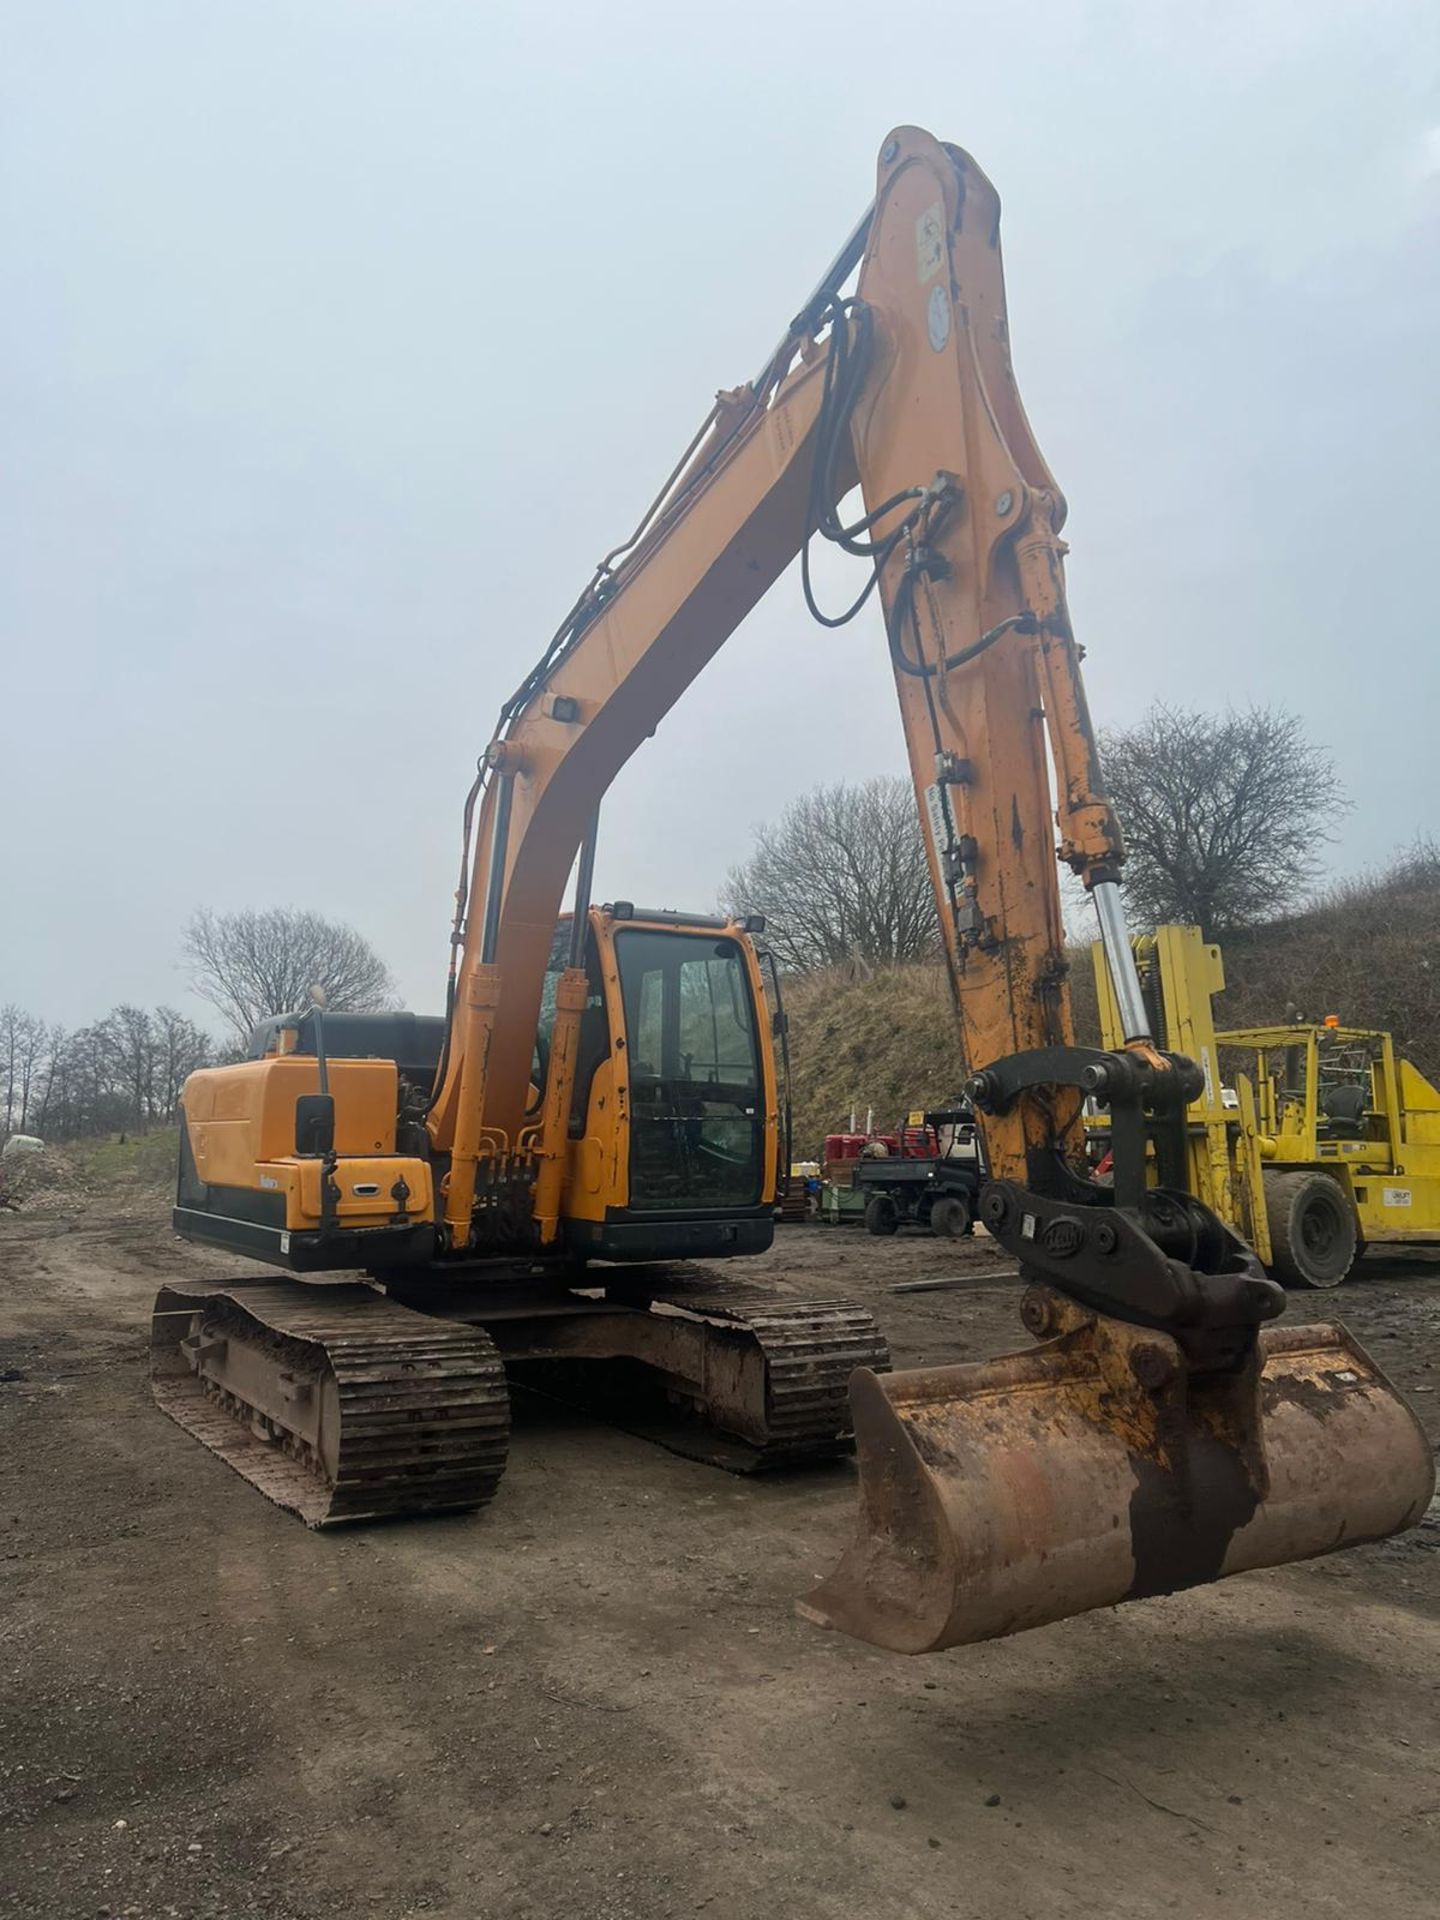 HYUNDAI ROBEX 140LC-9A 14 TON EXCAVATOR, RUNS WORKS AND DIGS, QIUCK HITCH, YEAR 2015 *PLUS VAT* - Image 2 of 12